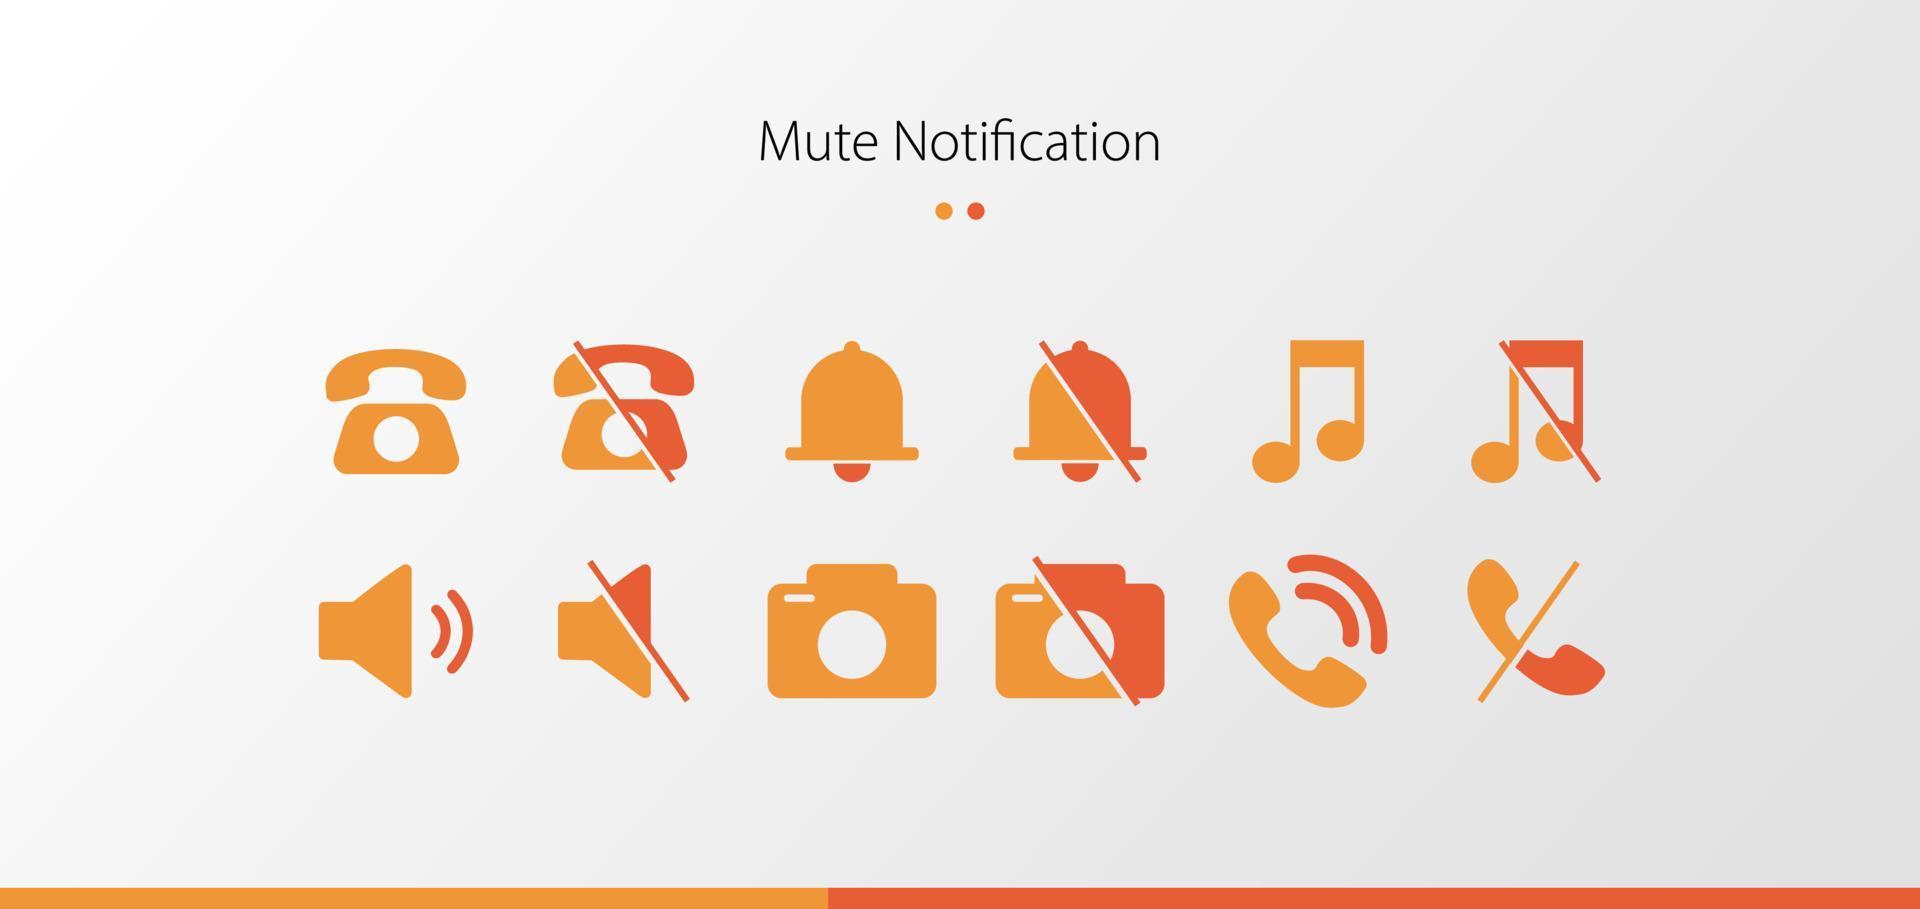 Phone,web,sound,music,photograph,alarm ,Mute Notification app Icon vector collection